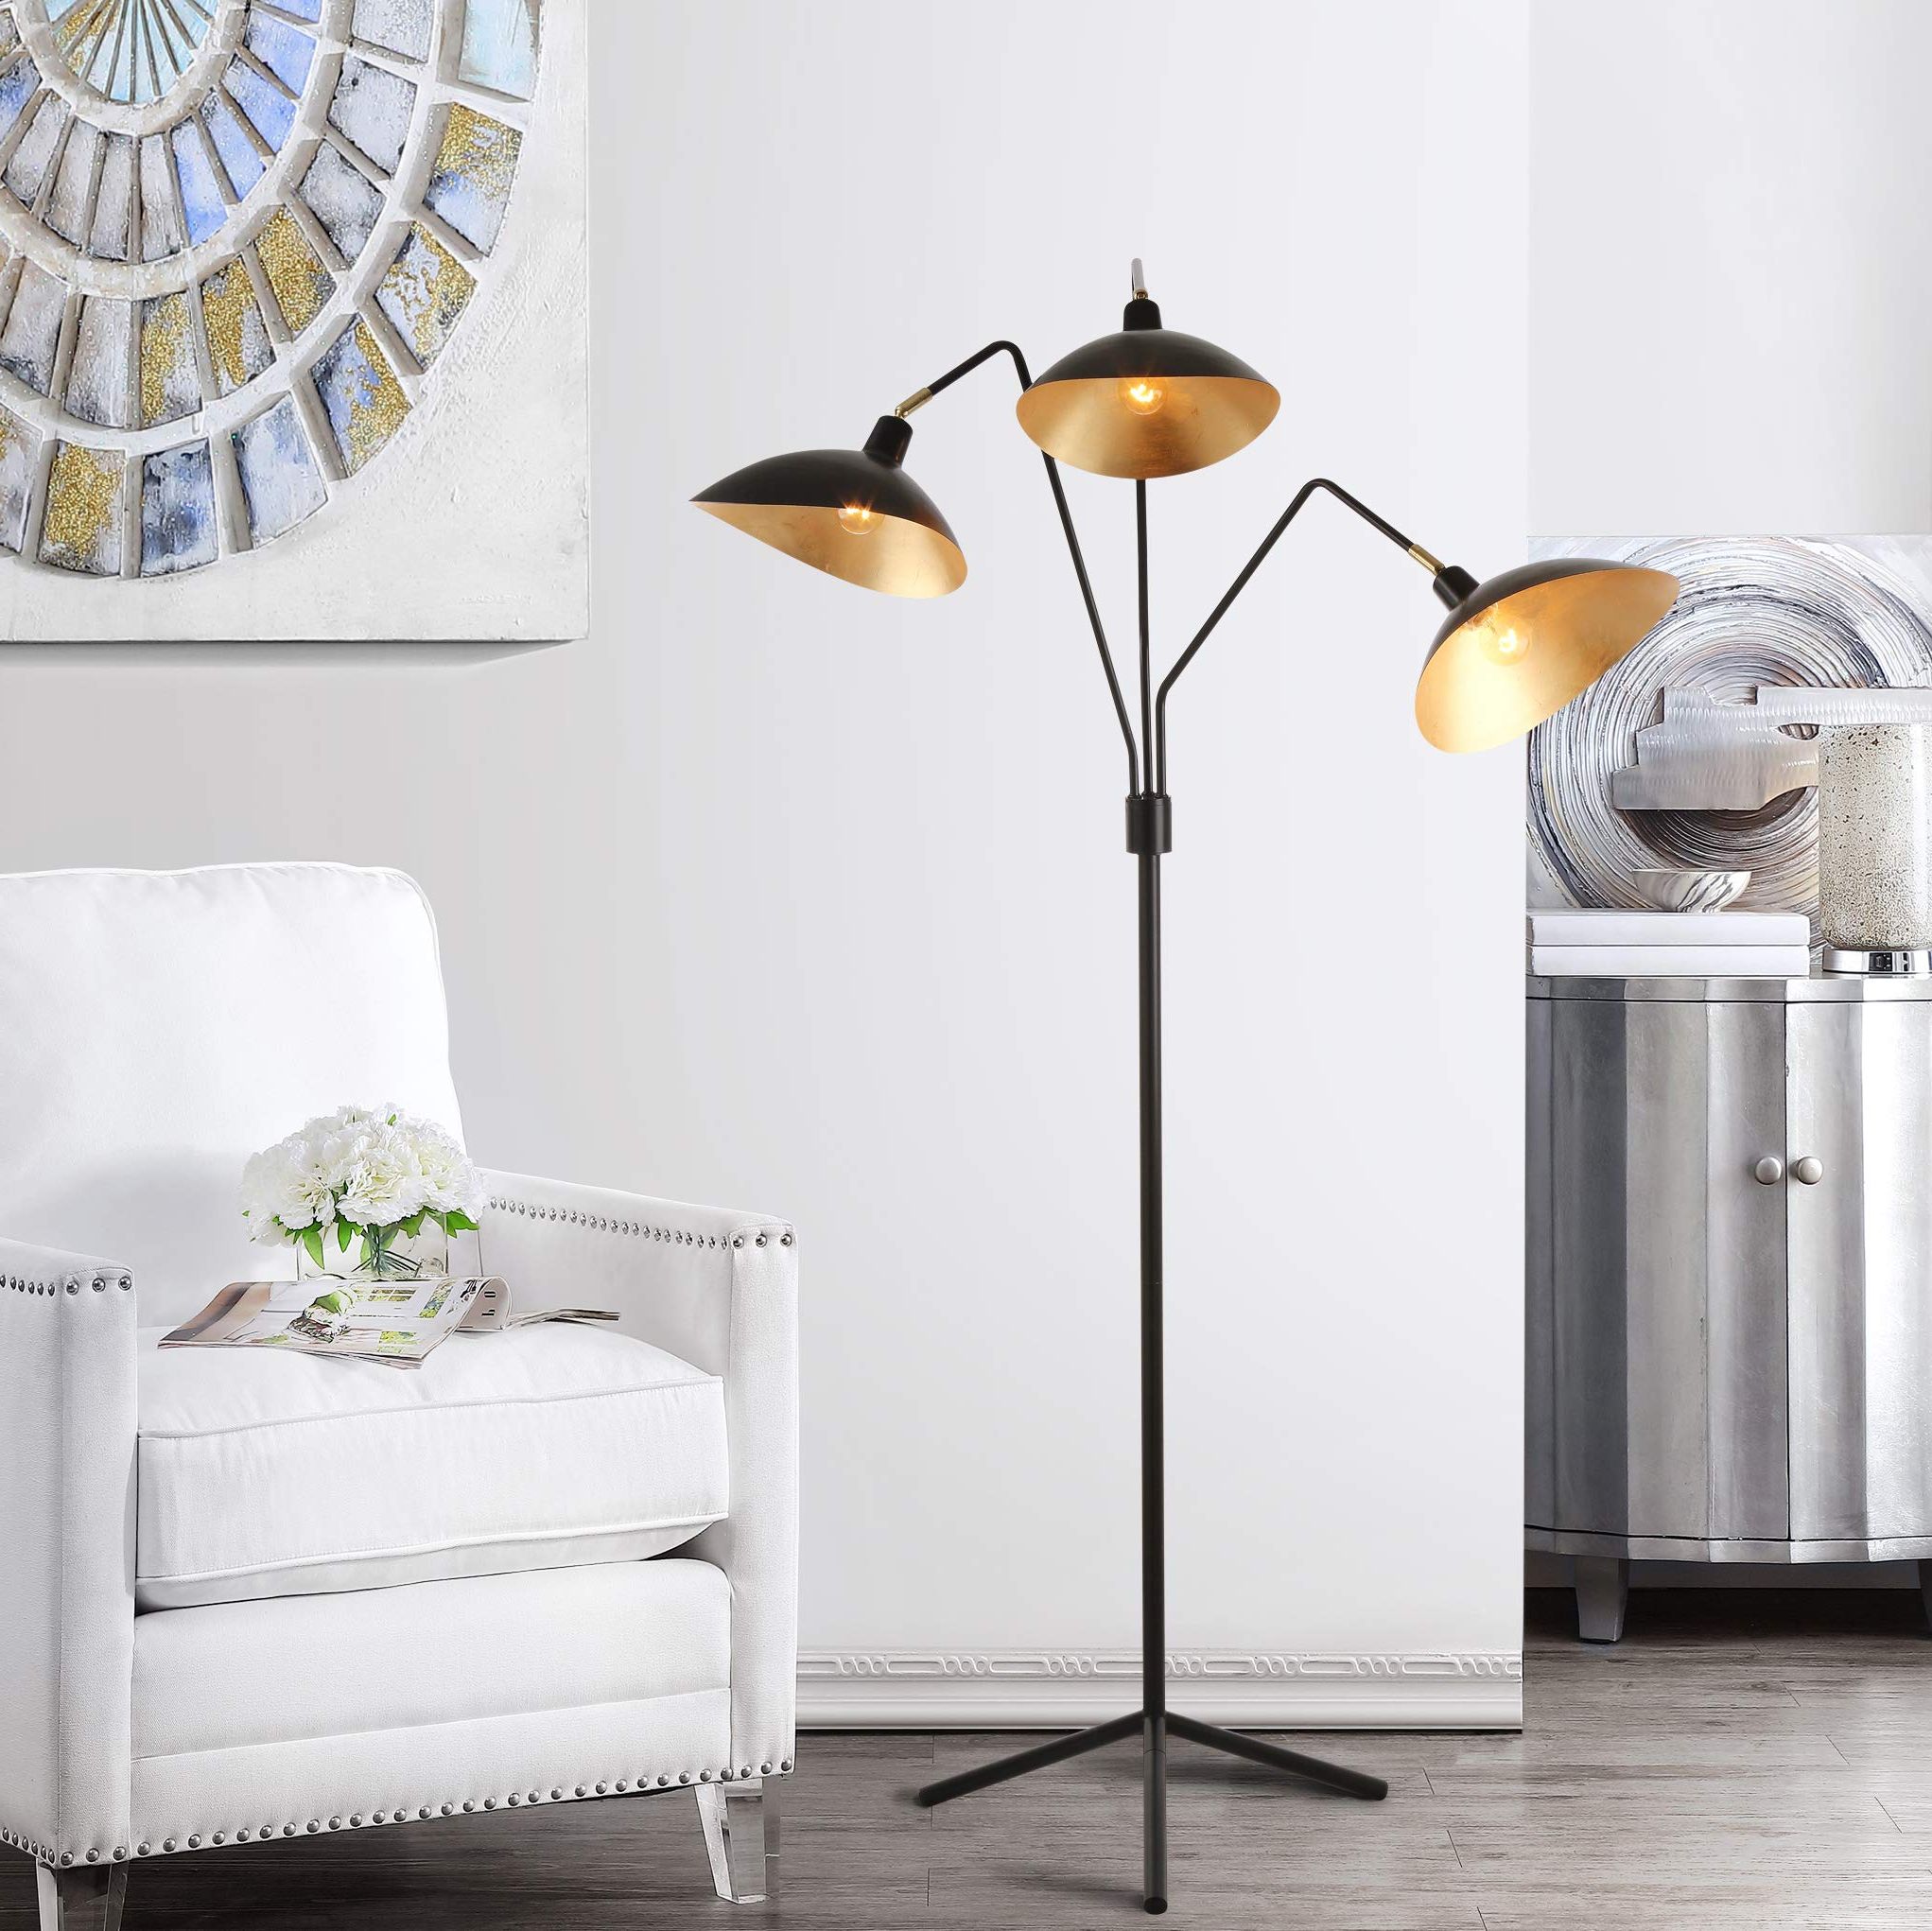 70 Inch Standing Lamps Throughout Latest Amazon: Safavieh Lighting Collection Iris Mid Century Modern  Contemporary Retro Black/ Gold 70 Inch Living Room Bedroom Home Office Standing  Floor Lamp (led Bulb Included) : Everything Else (View 1 of 10)